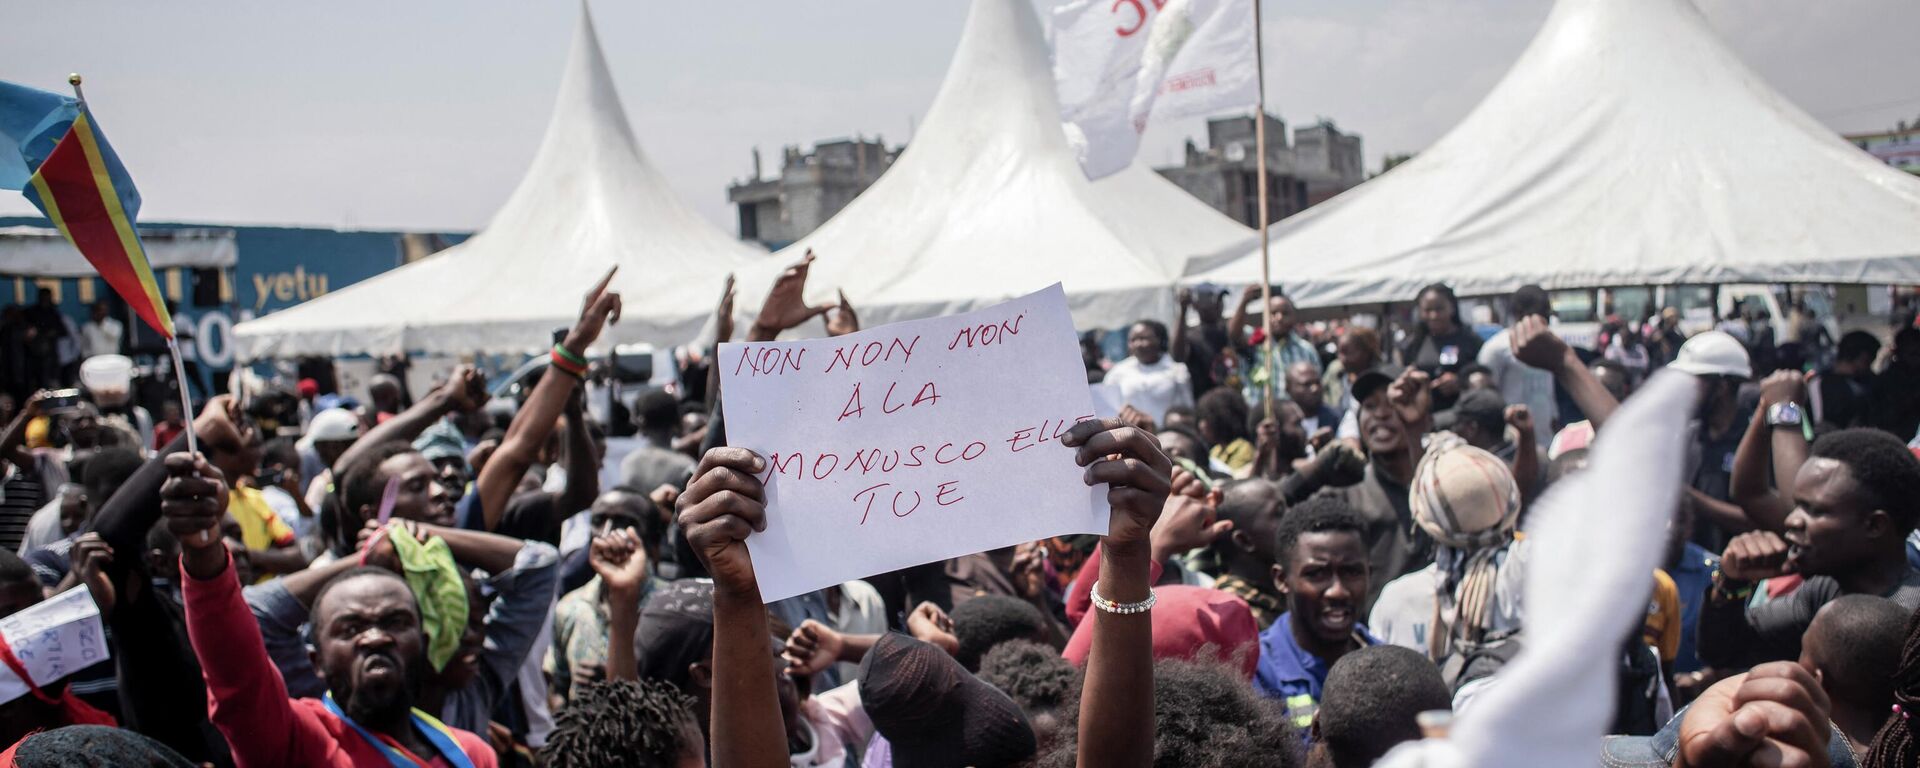 A man holds a placard during the burial of activists, who died during demonstrations that took place in Goma from July 25 to 27 to demand the departure of United Nations Organization Stabilization Mission in the Democratic Republic of the Congo (MONUSCO), in Goma on August 5, 2022. - Ten people who died in protests against the UN Mission that recently rocked towns in eastern Democratic Republic of Congo were laid to rest in Goma on August 5, 2022 after a popular tribute ceremony.
At the end of July, angry demonstrators ransacked and looted facilities of the United Nations Mission for the Stabilization of the DRC (Monusco), present in the country since 1999.
A total of 32 demonstrators and four peacekeepers were killed in a week of demonstrations in at least four eastern towns. (Photo by Guerchom Ndebo / AFP) - Sputnik International, 1920, 01.10.2022